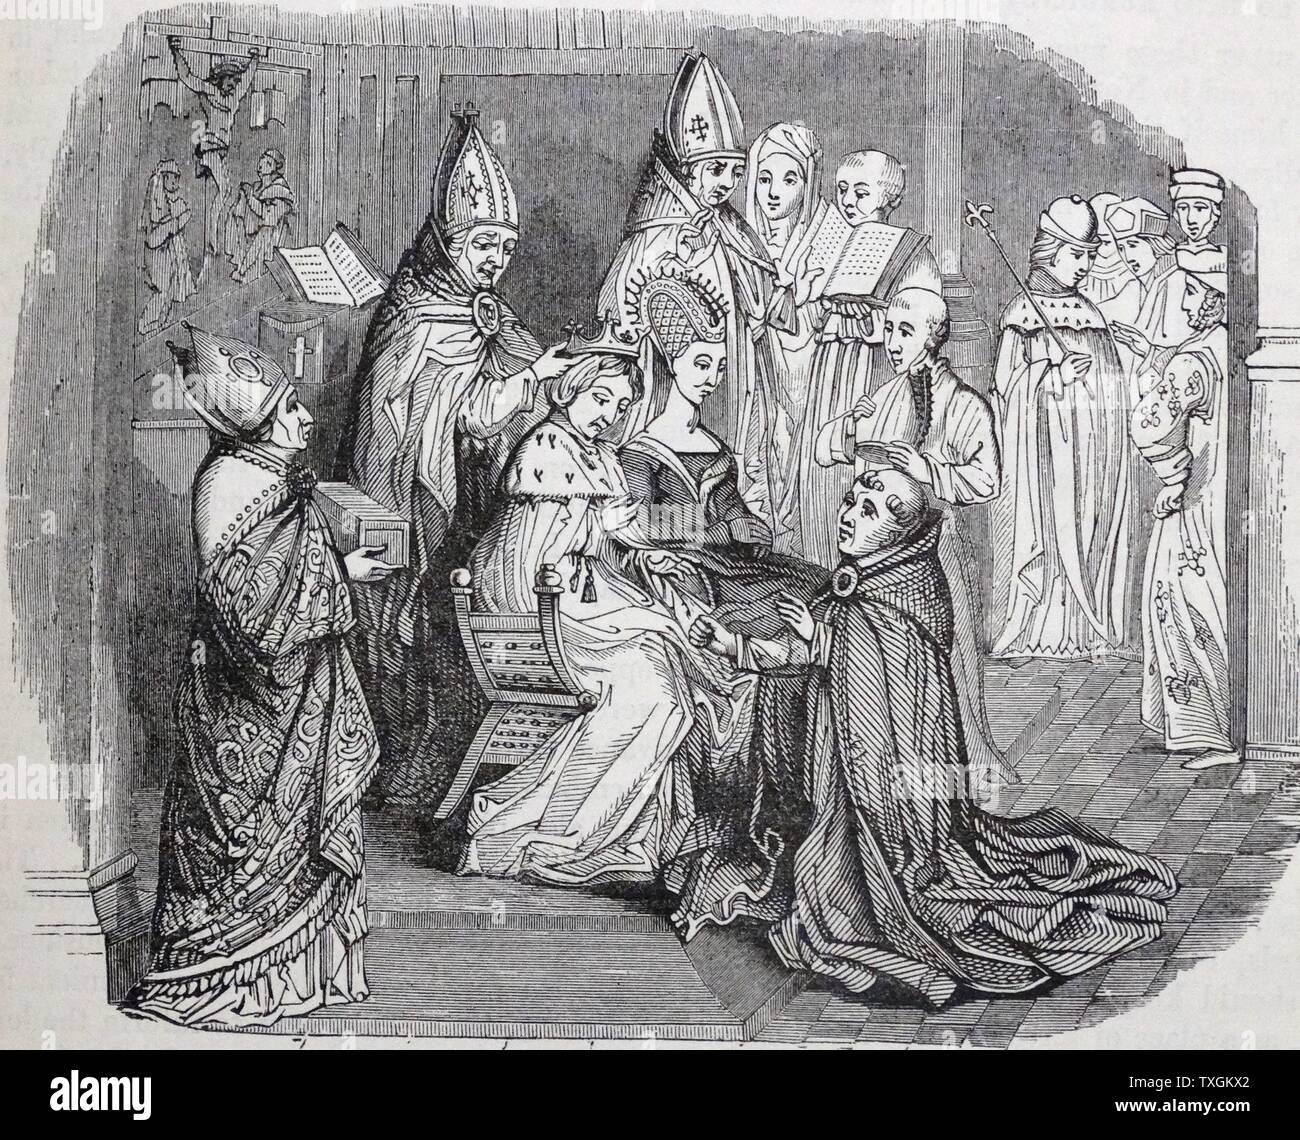 Engraving depicting the coronation of King Charles V, Holy Roman Emperor (1500-1558) and his Queen Isabella of Portugal (1503-1539). Dated 16th Century Stock Photo